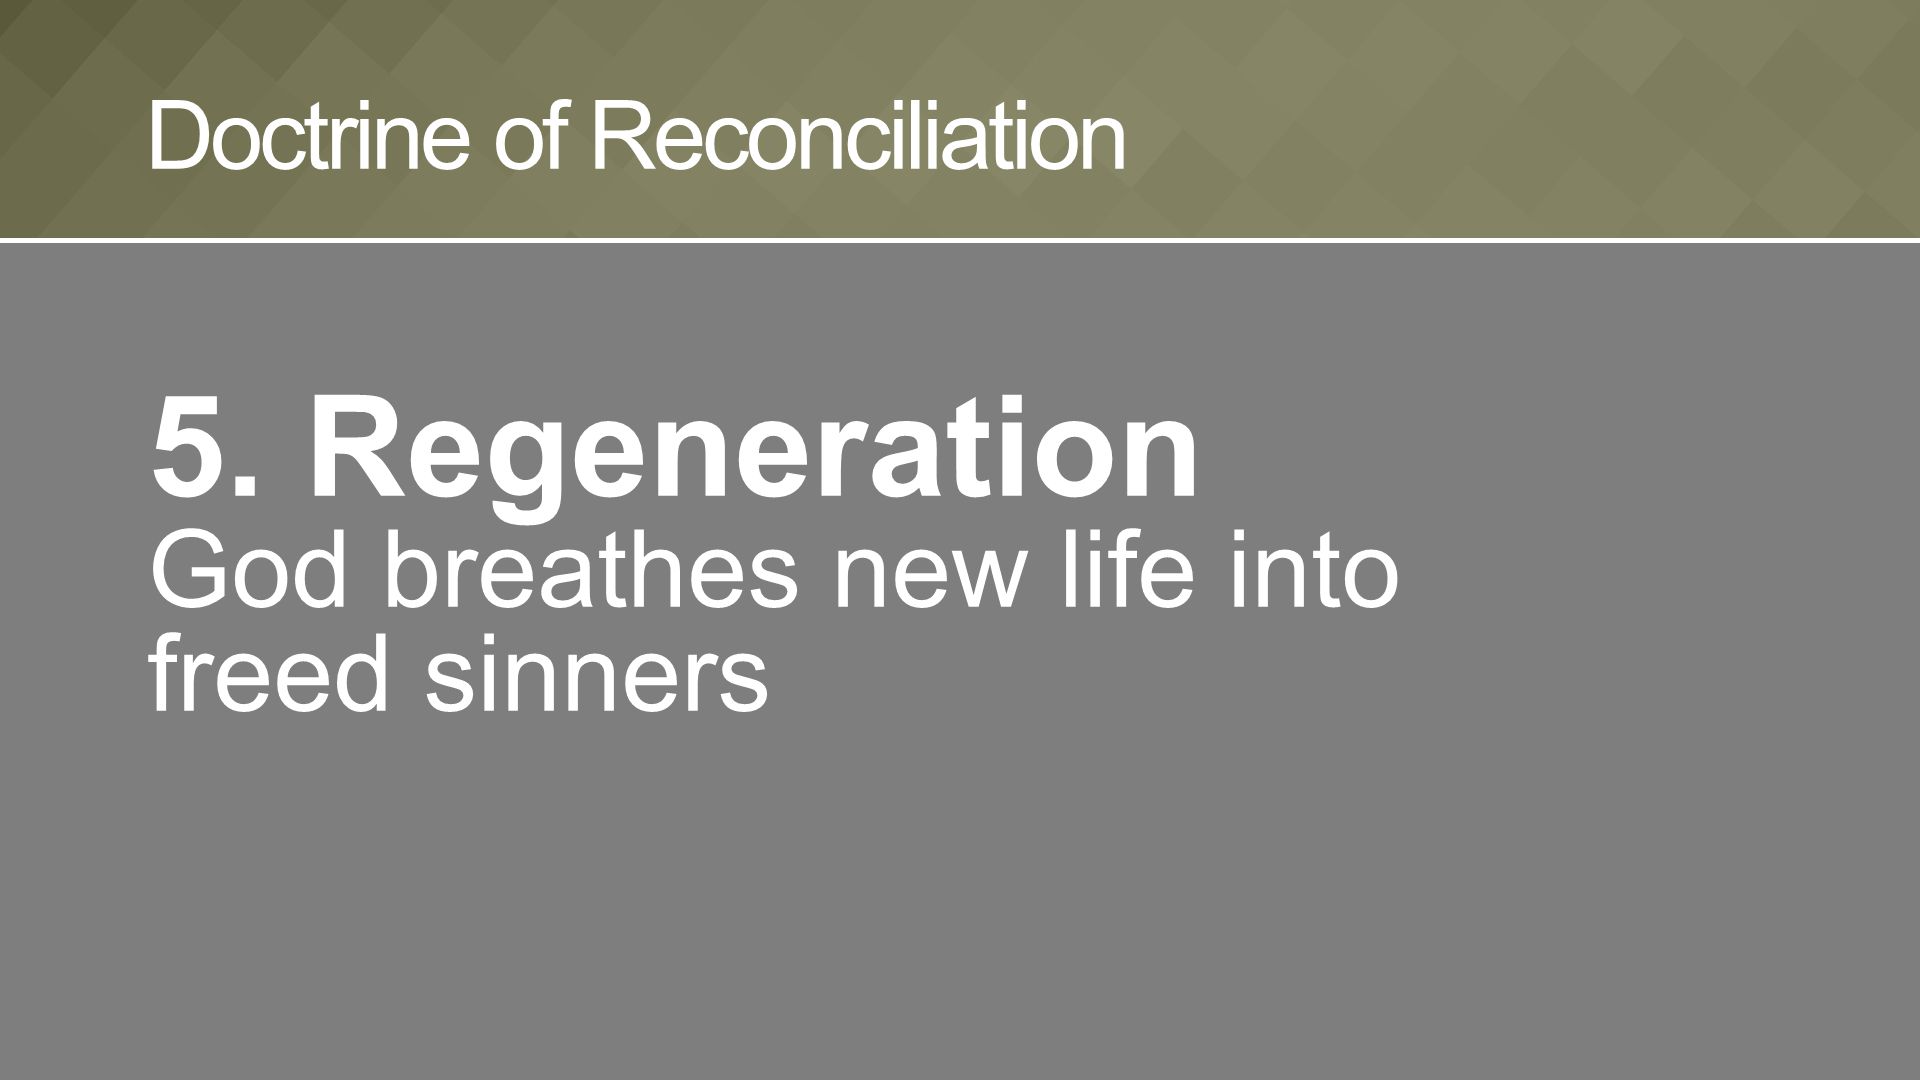 5. Regeneration God breathes new life into freed sinners Doctrine of Reconciliation